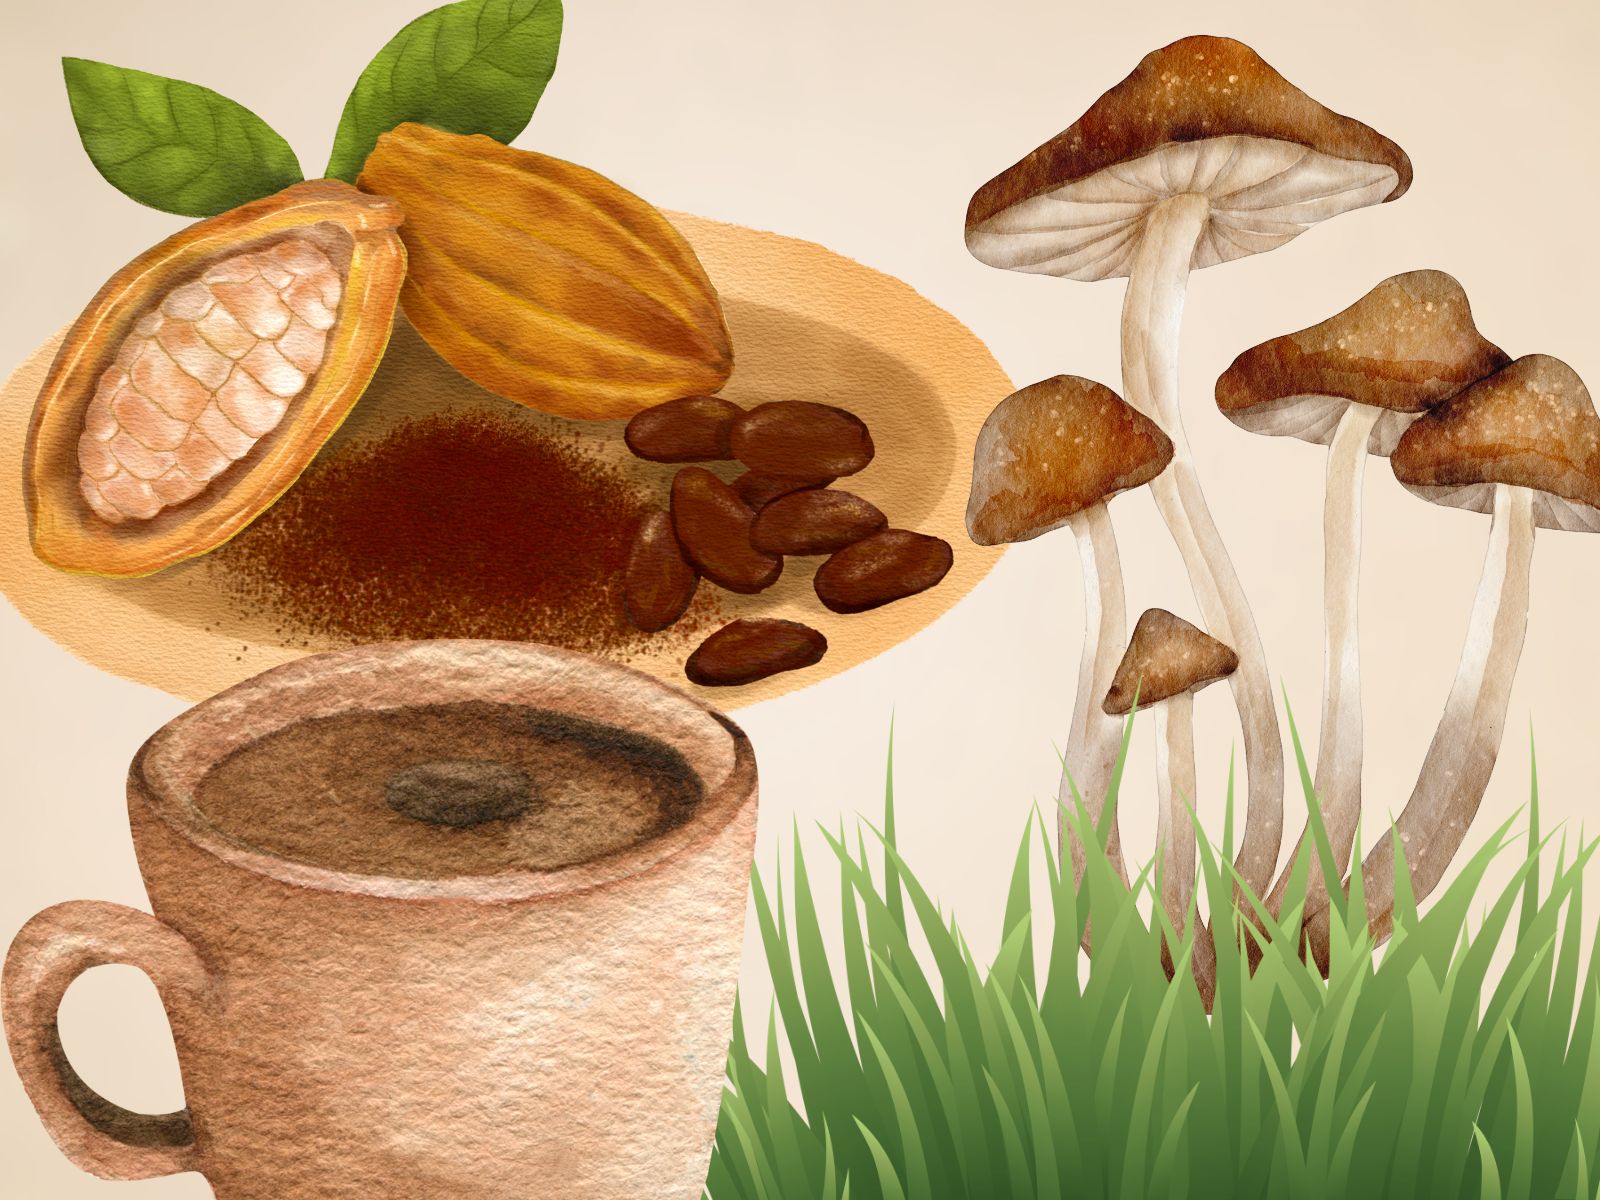 Ceremonial Cacao and Psilocybin Mushrooms: Historical Overlap and Therapeutic Synergy